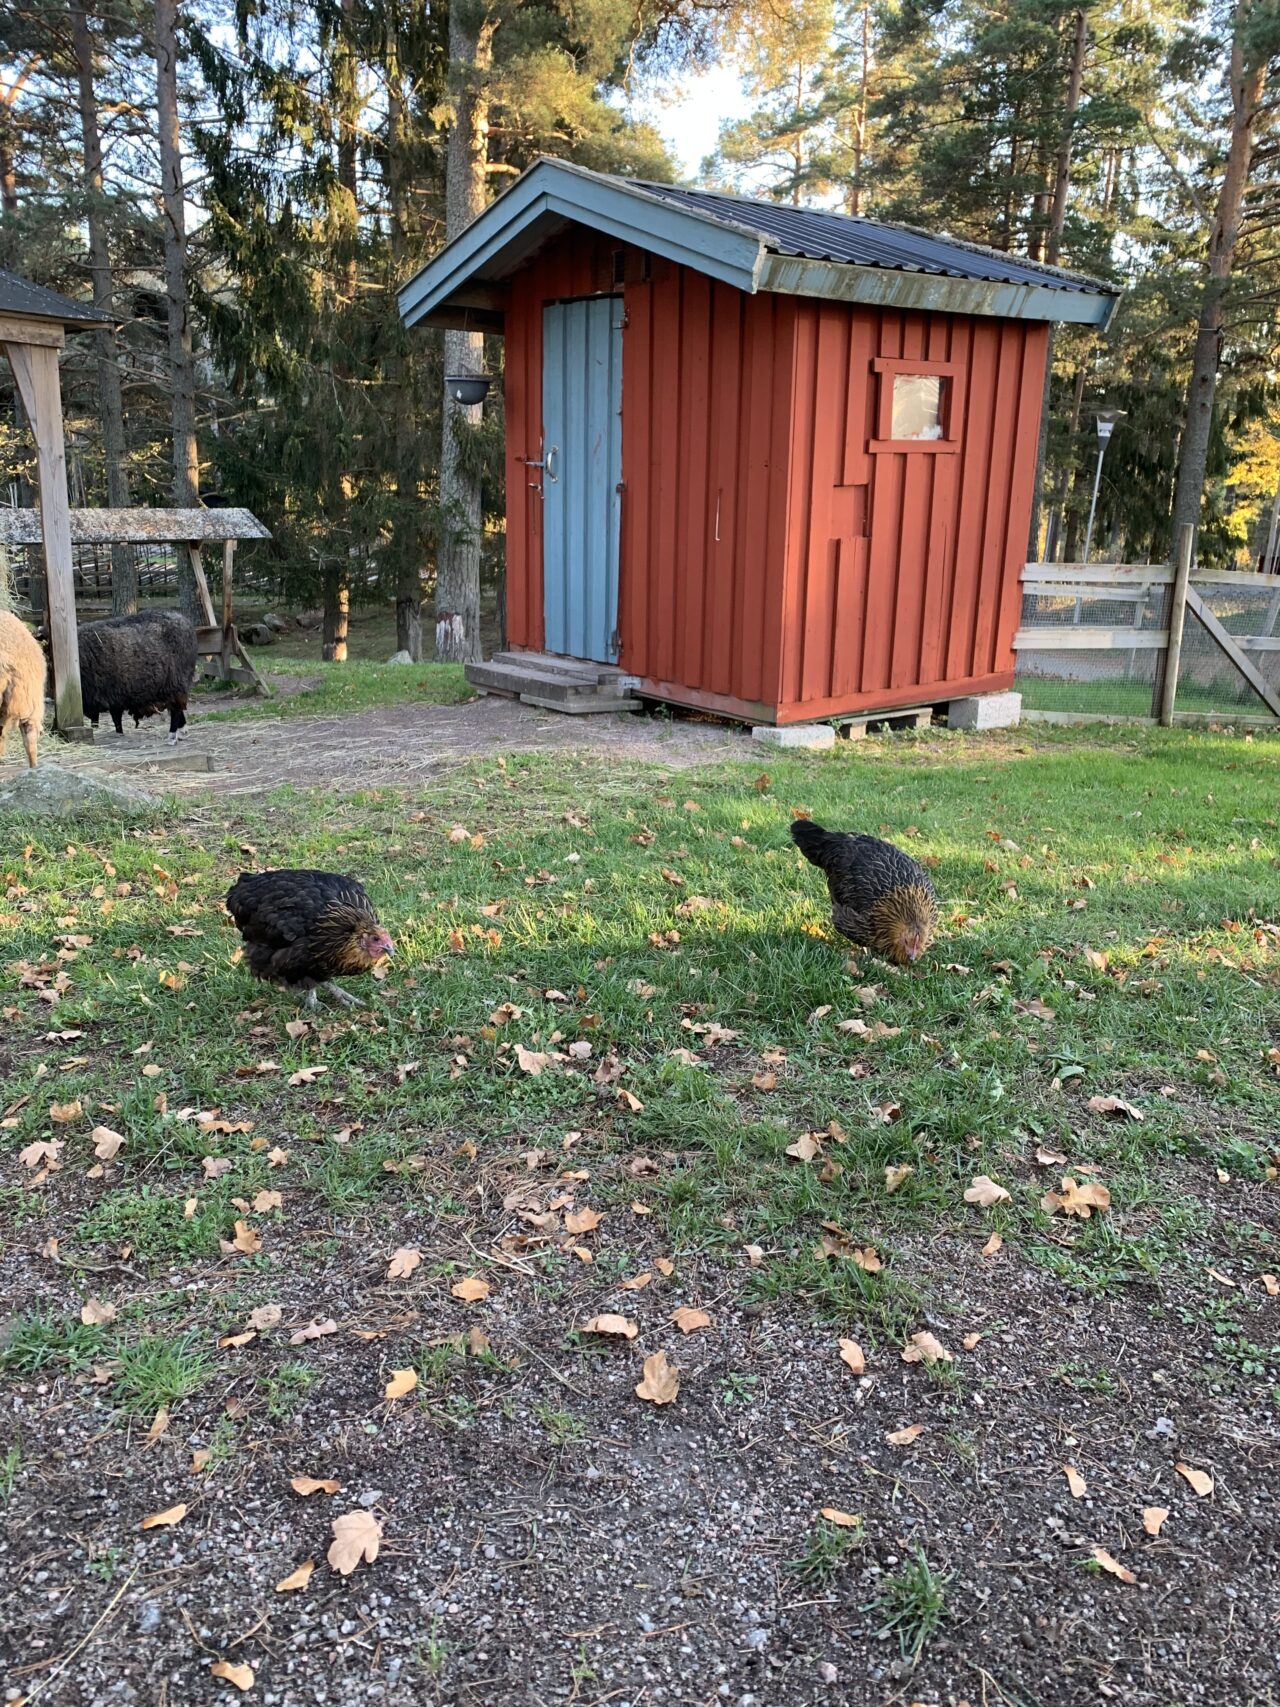 Chickens And Sheep In Front Of A Small Red House